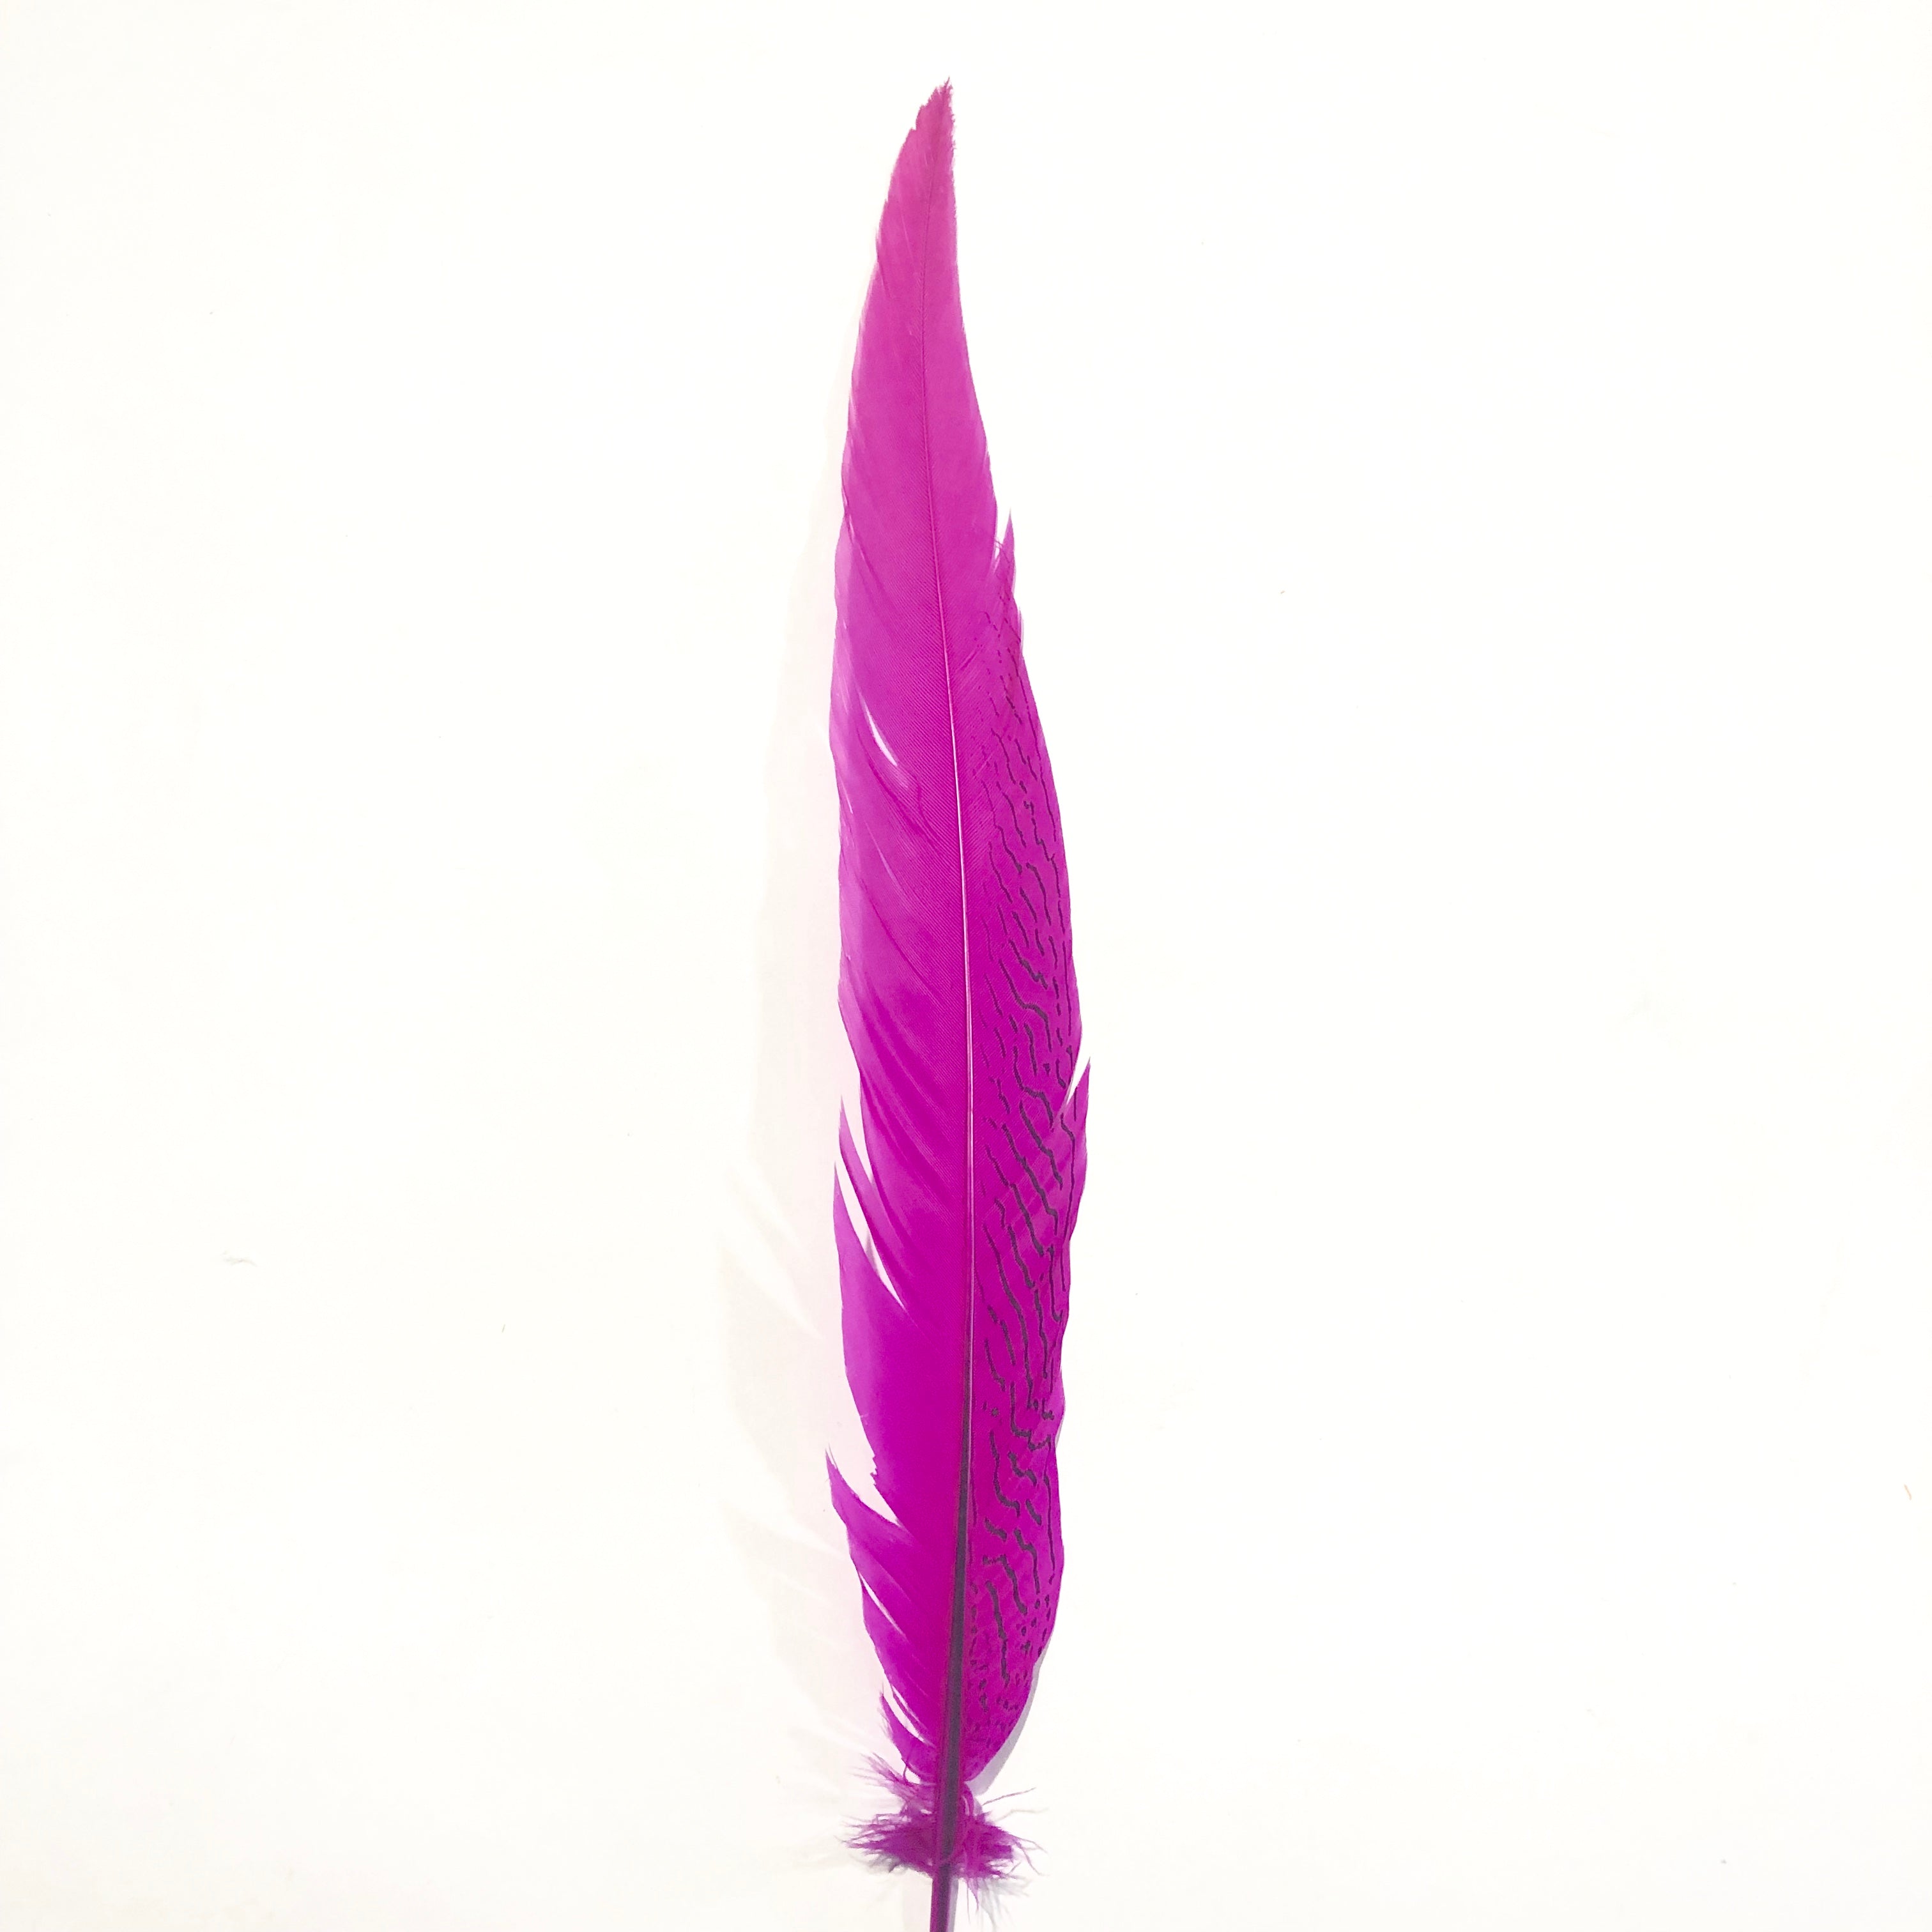 20" to 30" Silver Pheasant Tail Feather - Cerise